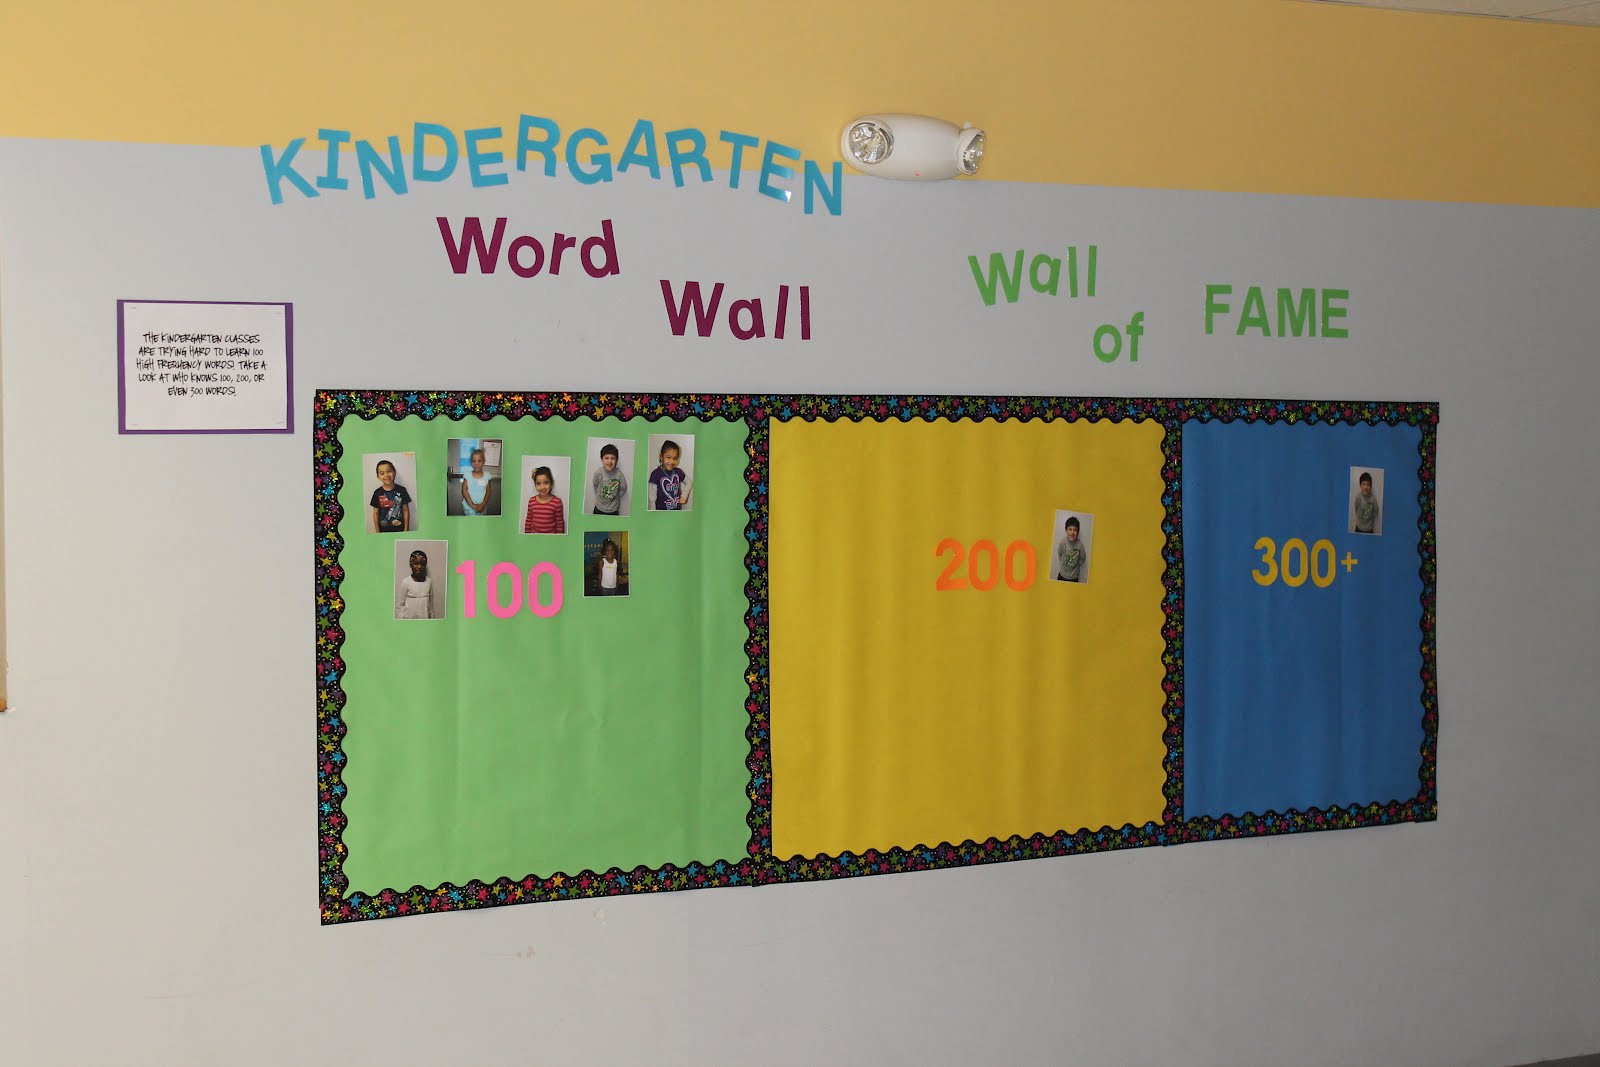 Wild wordwall. Word Wall. Wall of Fame. Wordwall 7. Wall of Fame in English class.